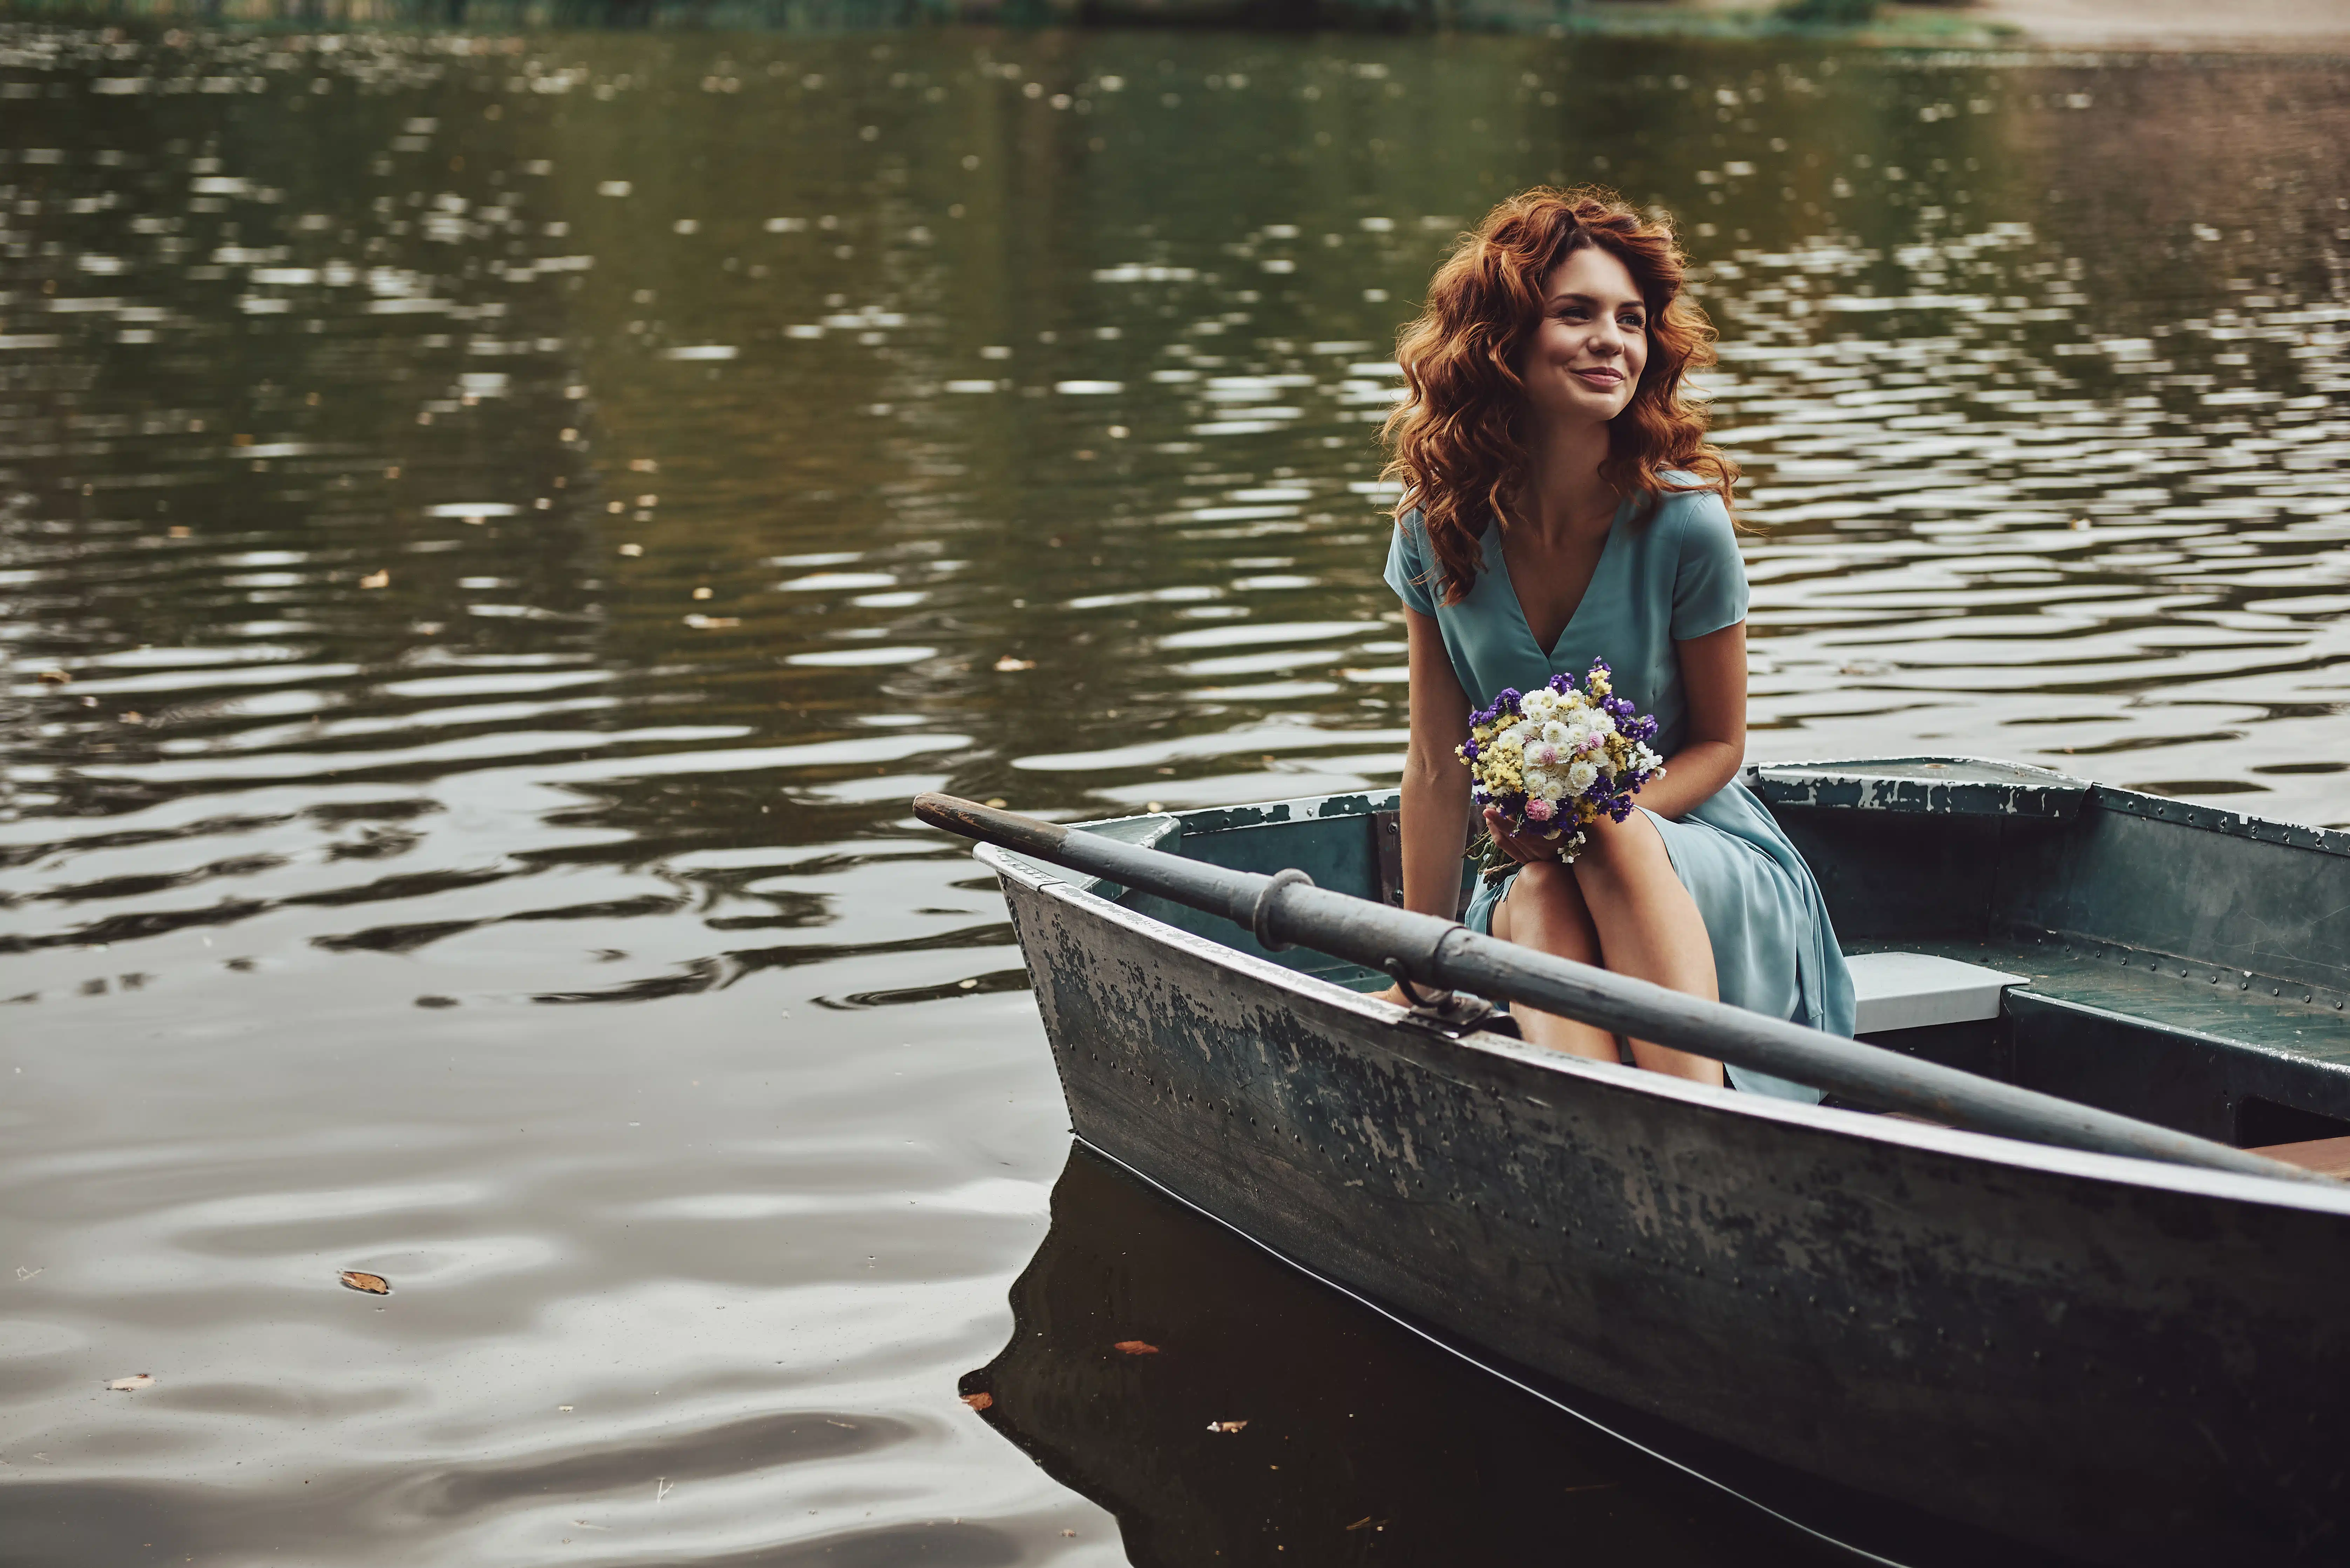 Charming young woman in elegant dress on a boat holding flowers